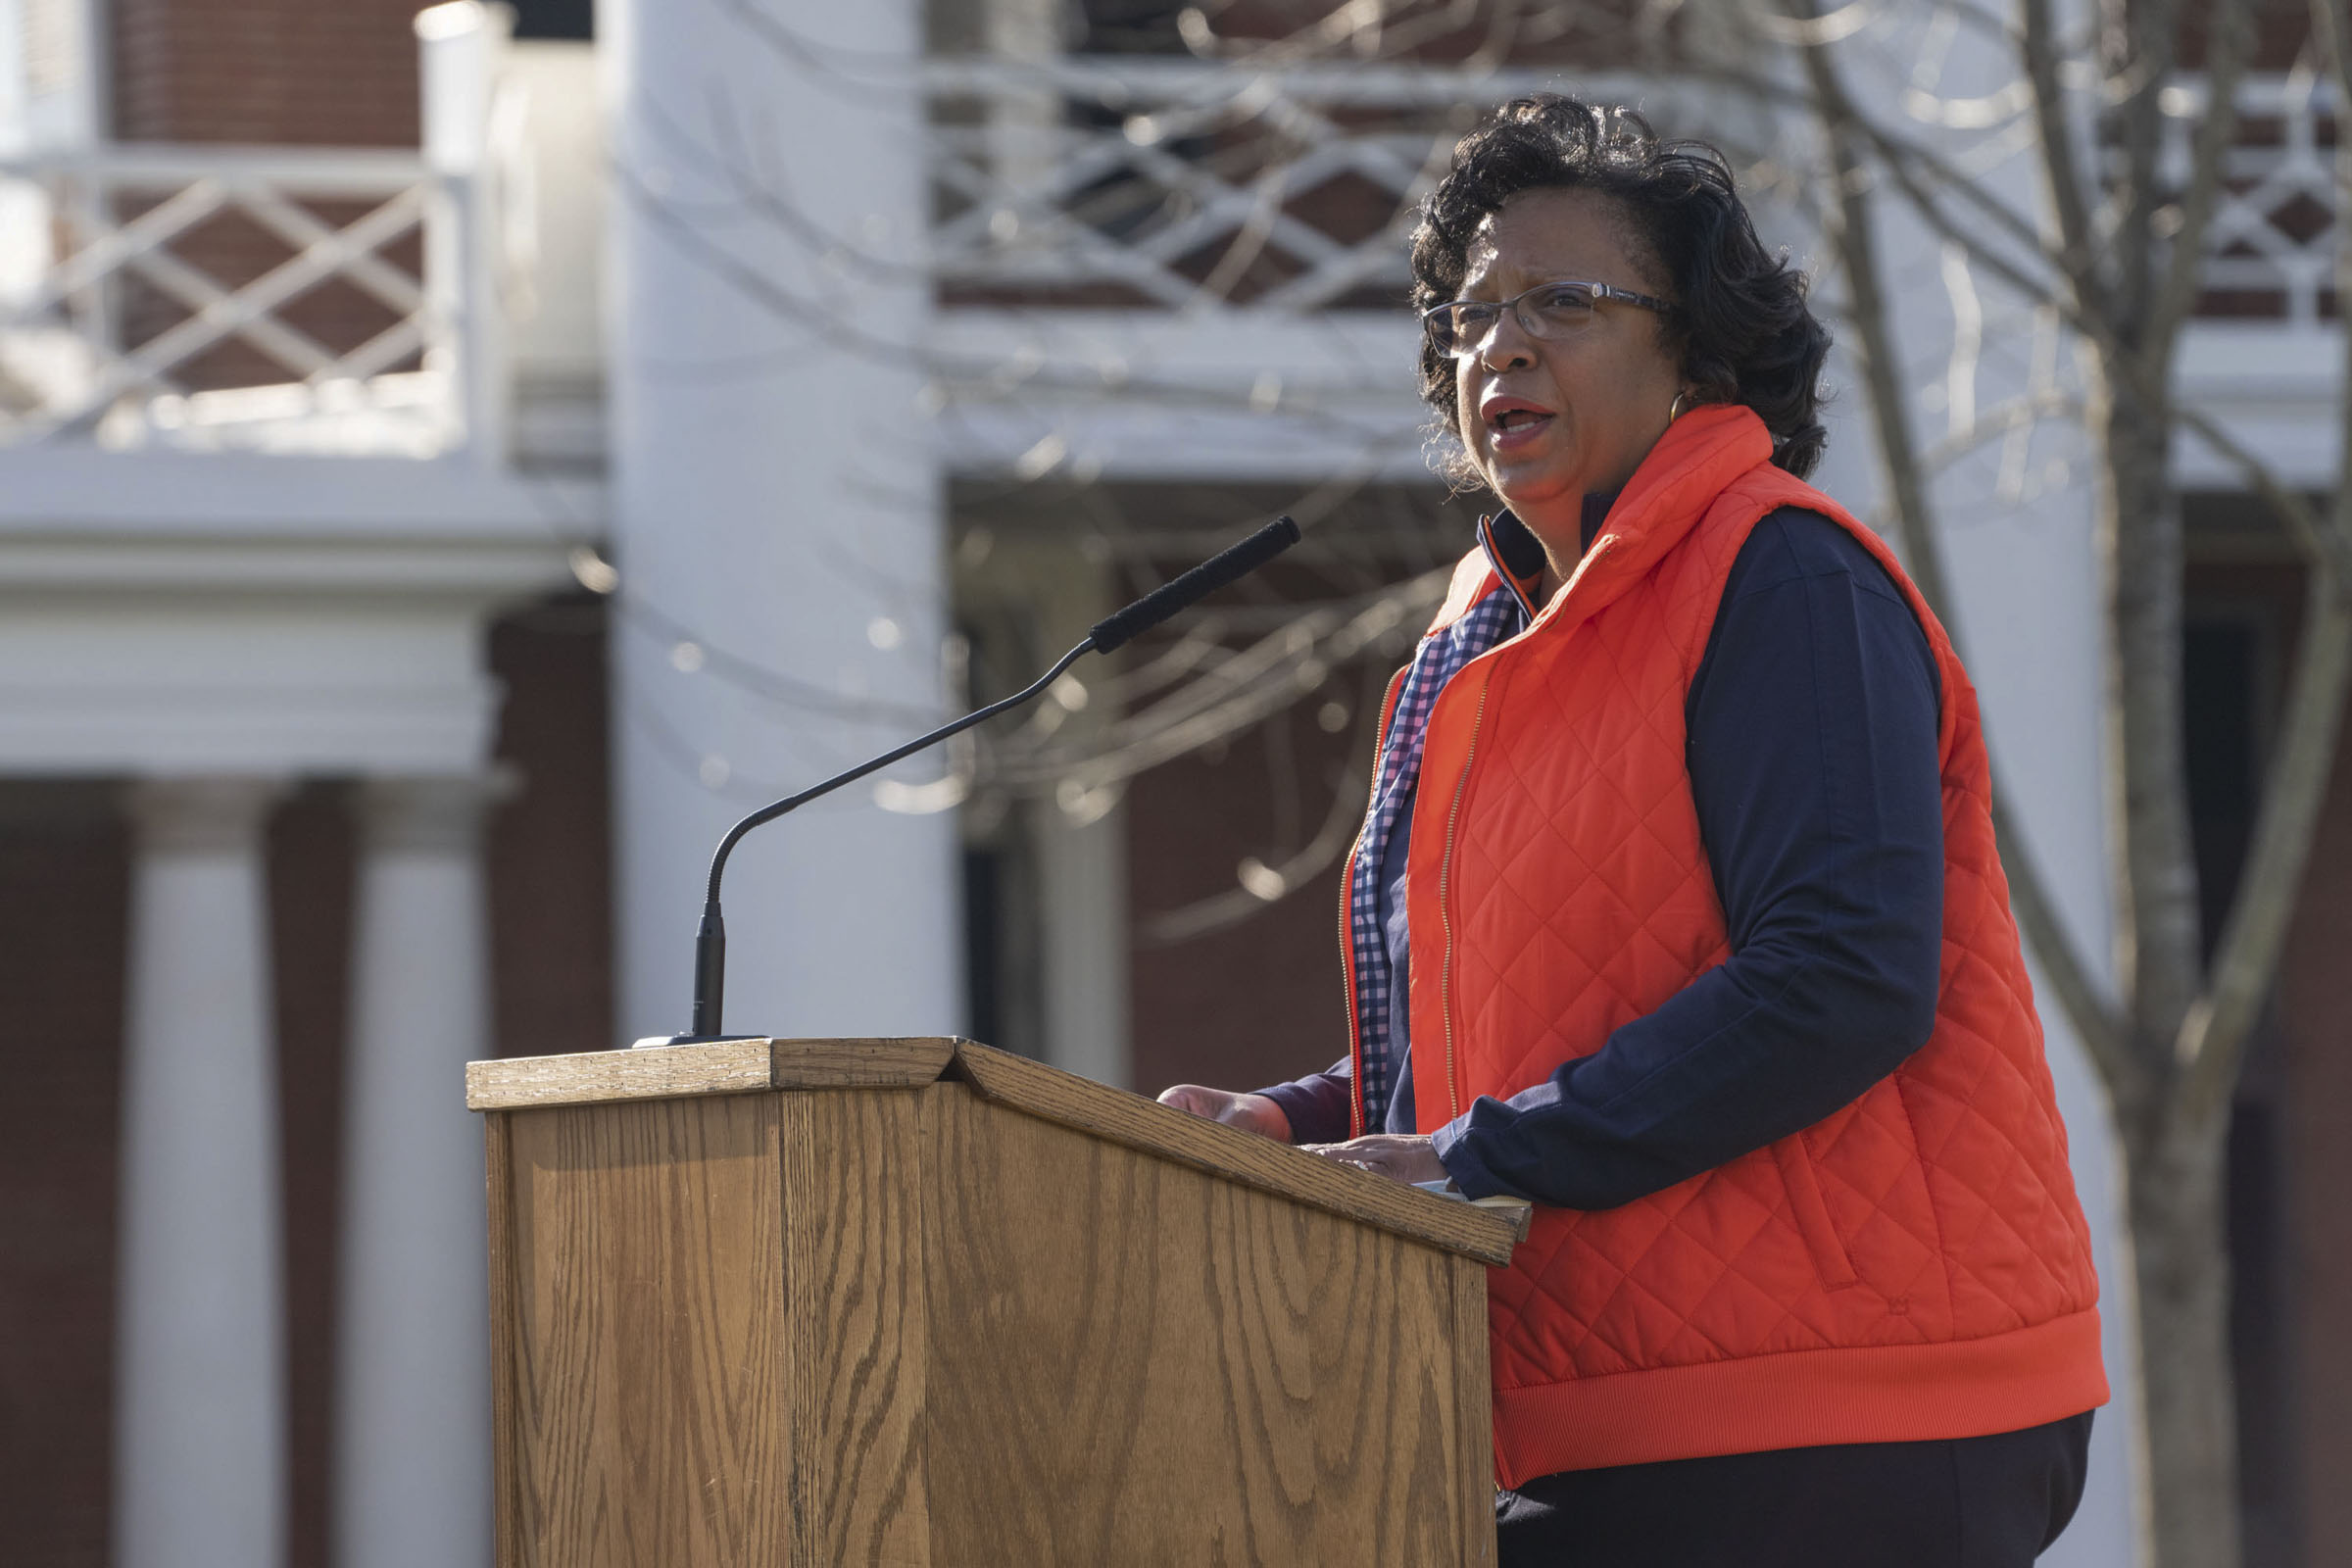 A woman in an orange vest speaks into a microphone at a podium